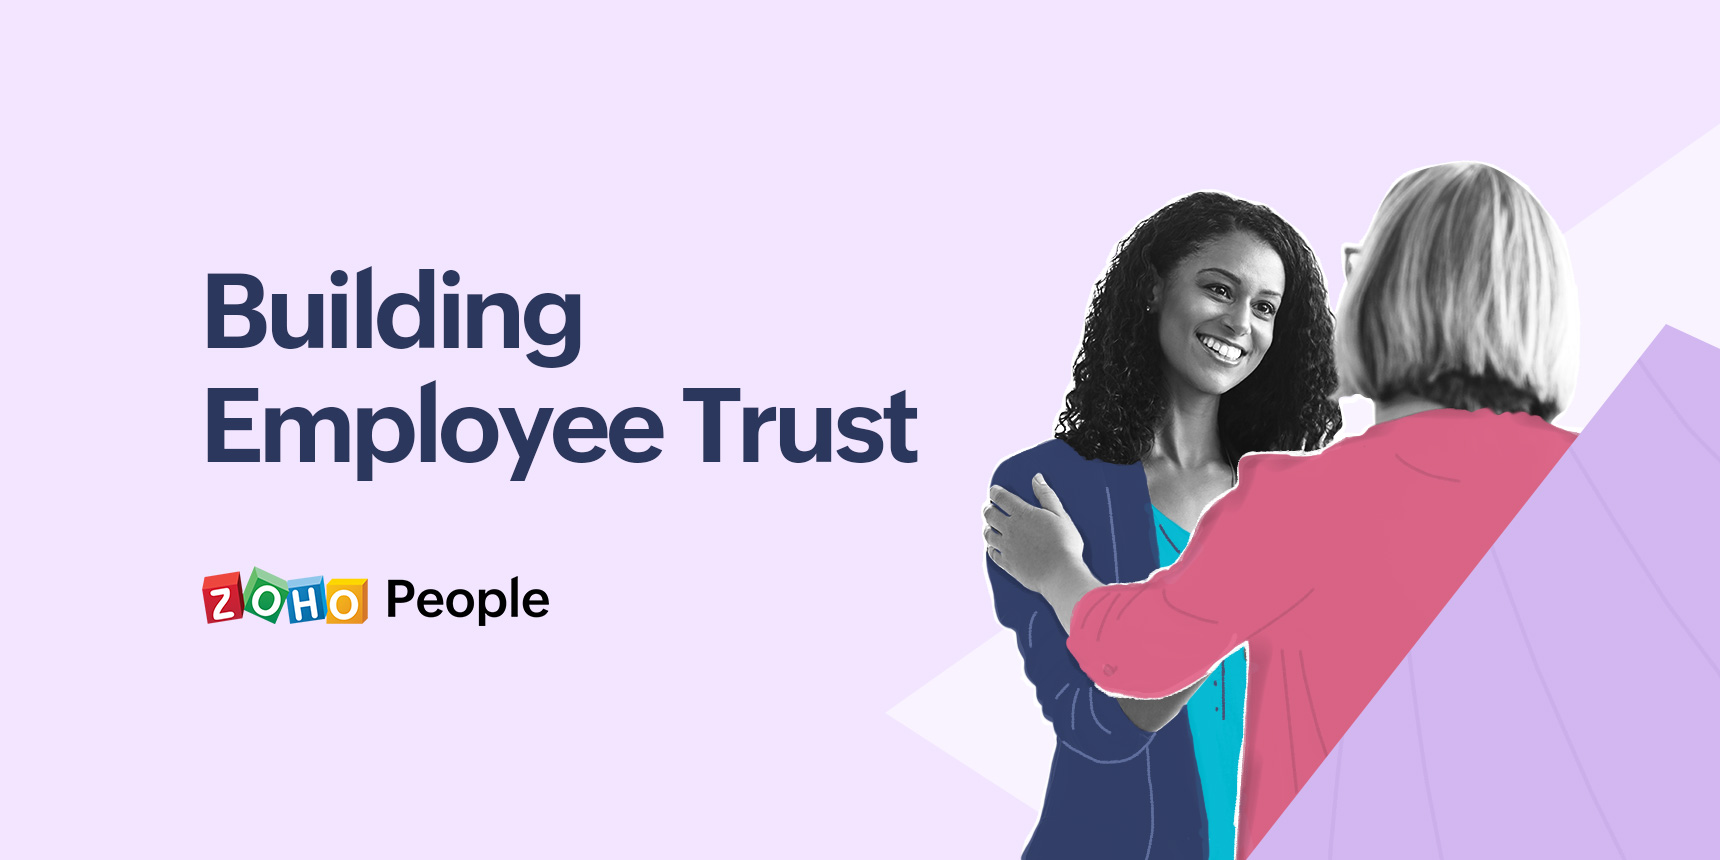 How organizations can build employee trust